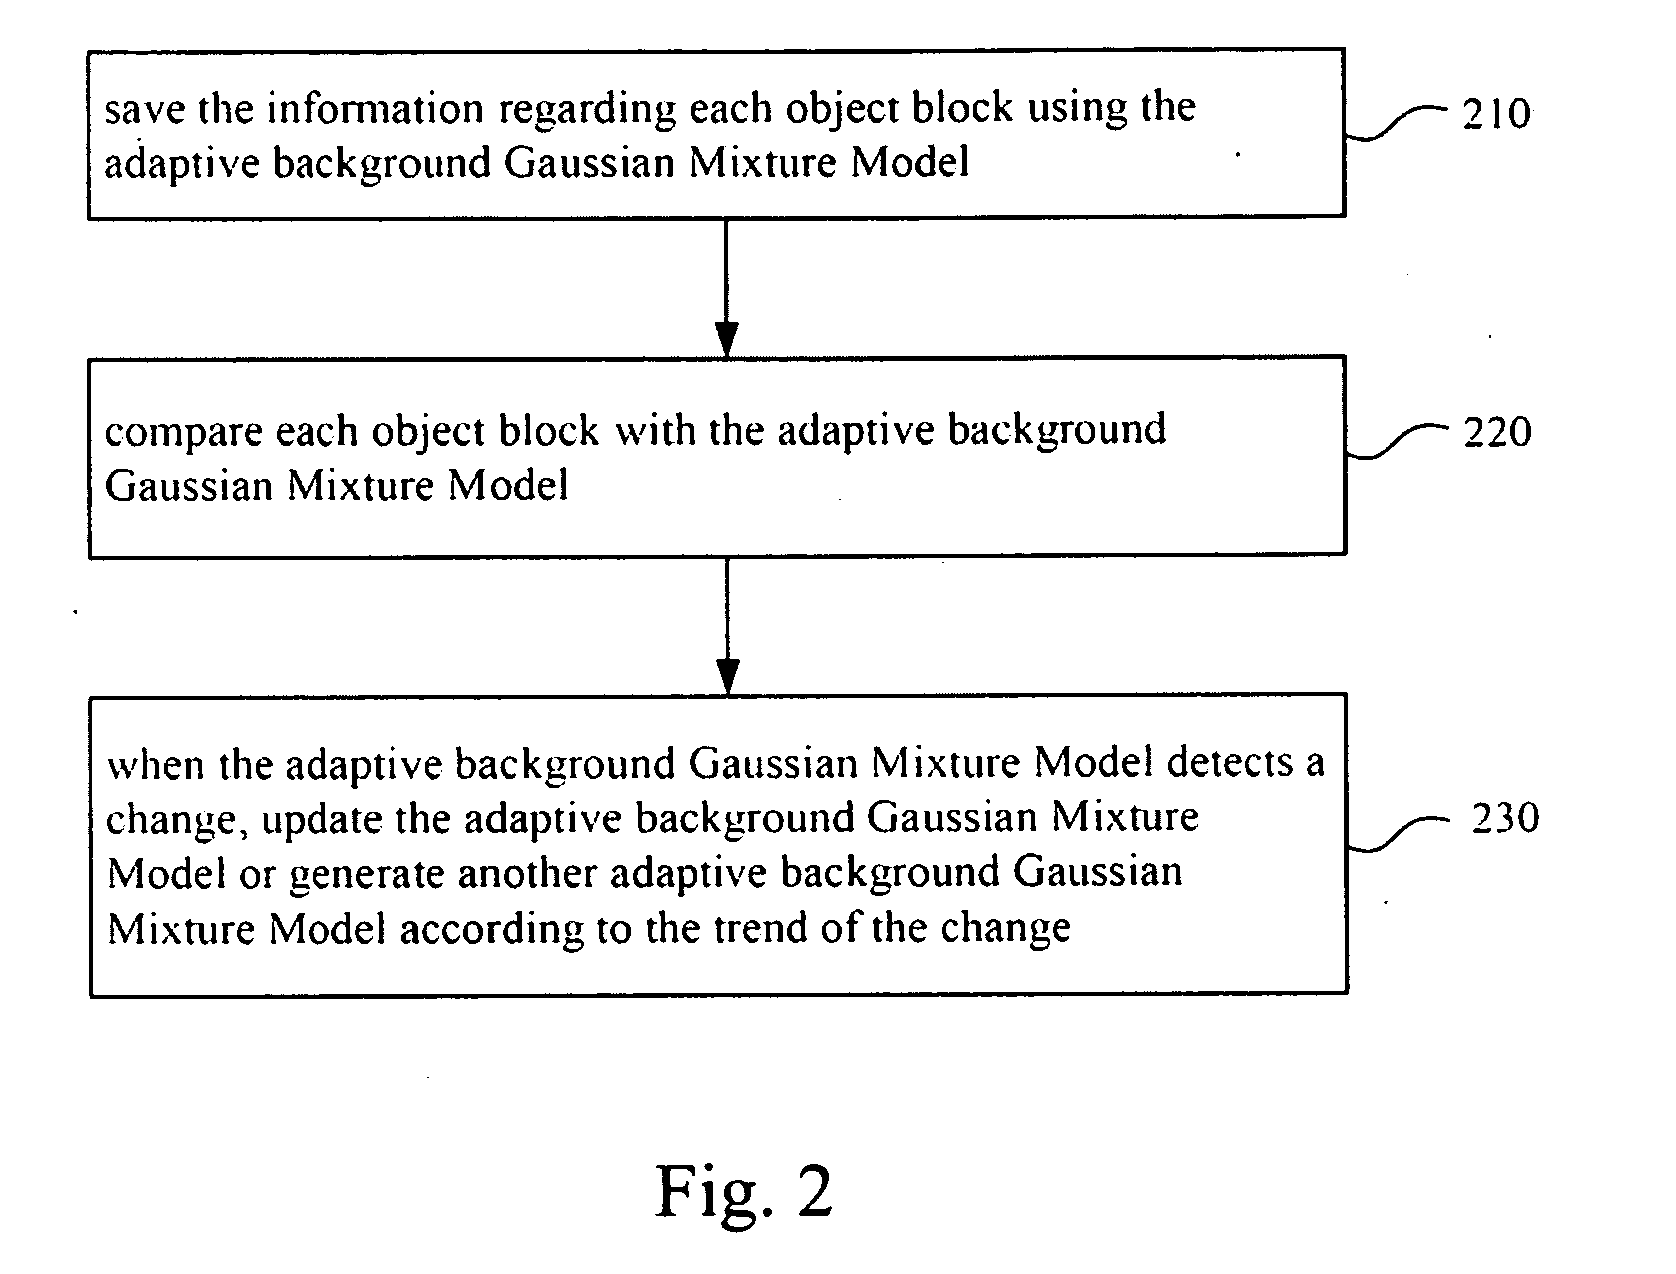 Method and system for foreground detection using multi-modality fusion graph cut